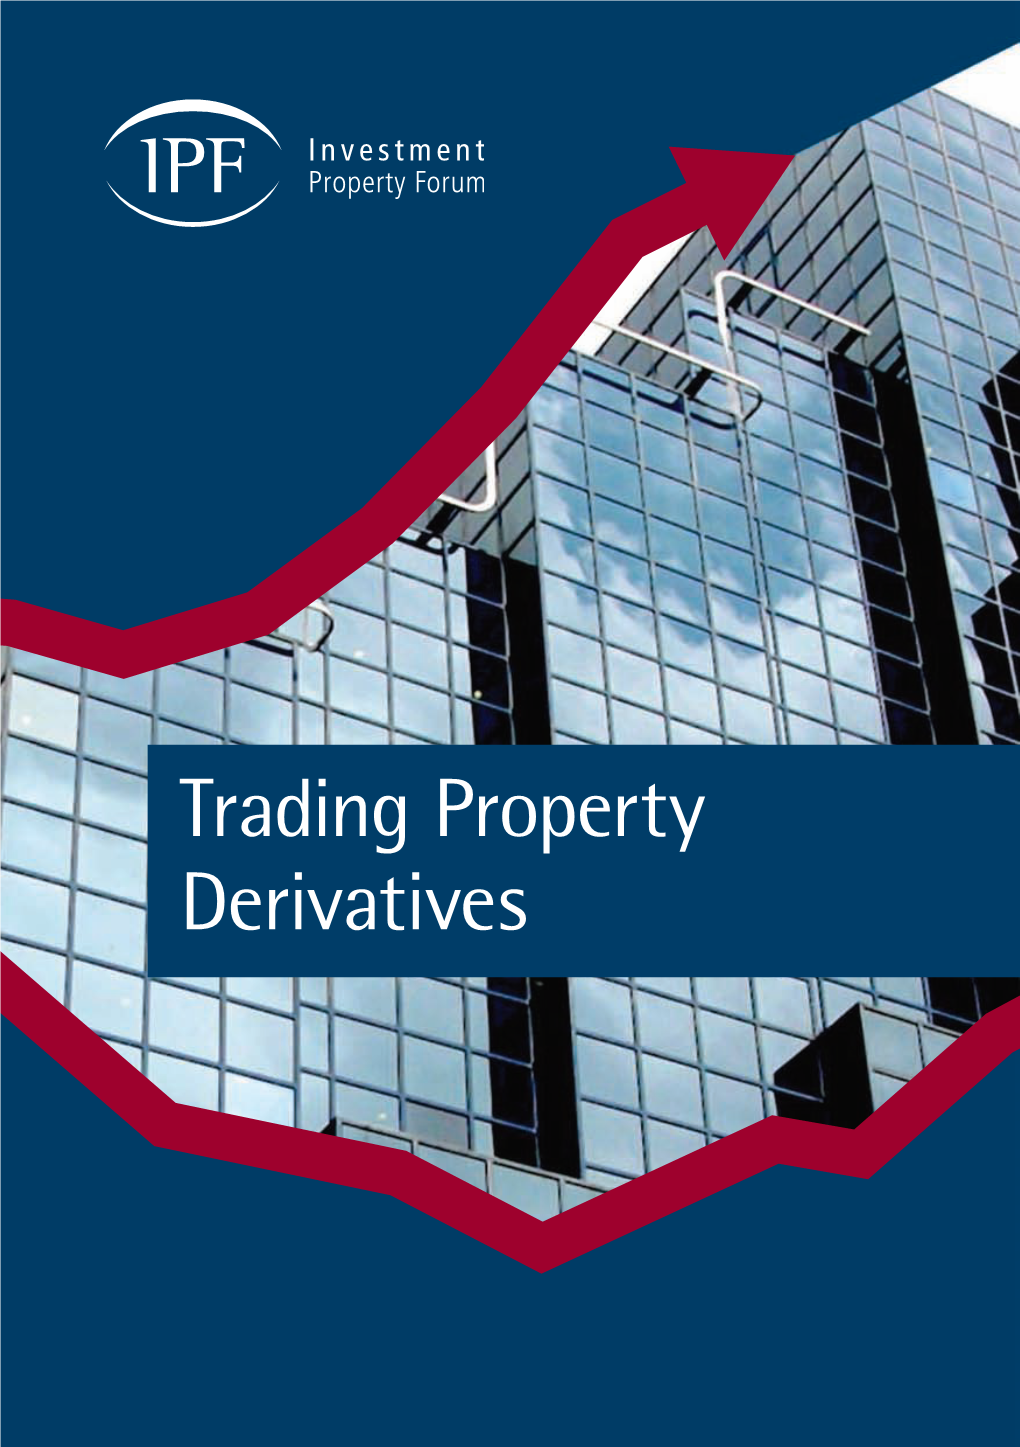 Trading Property Derivatives © Investment Property Forum, March 2010